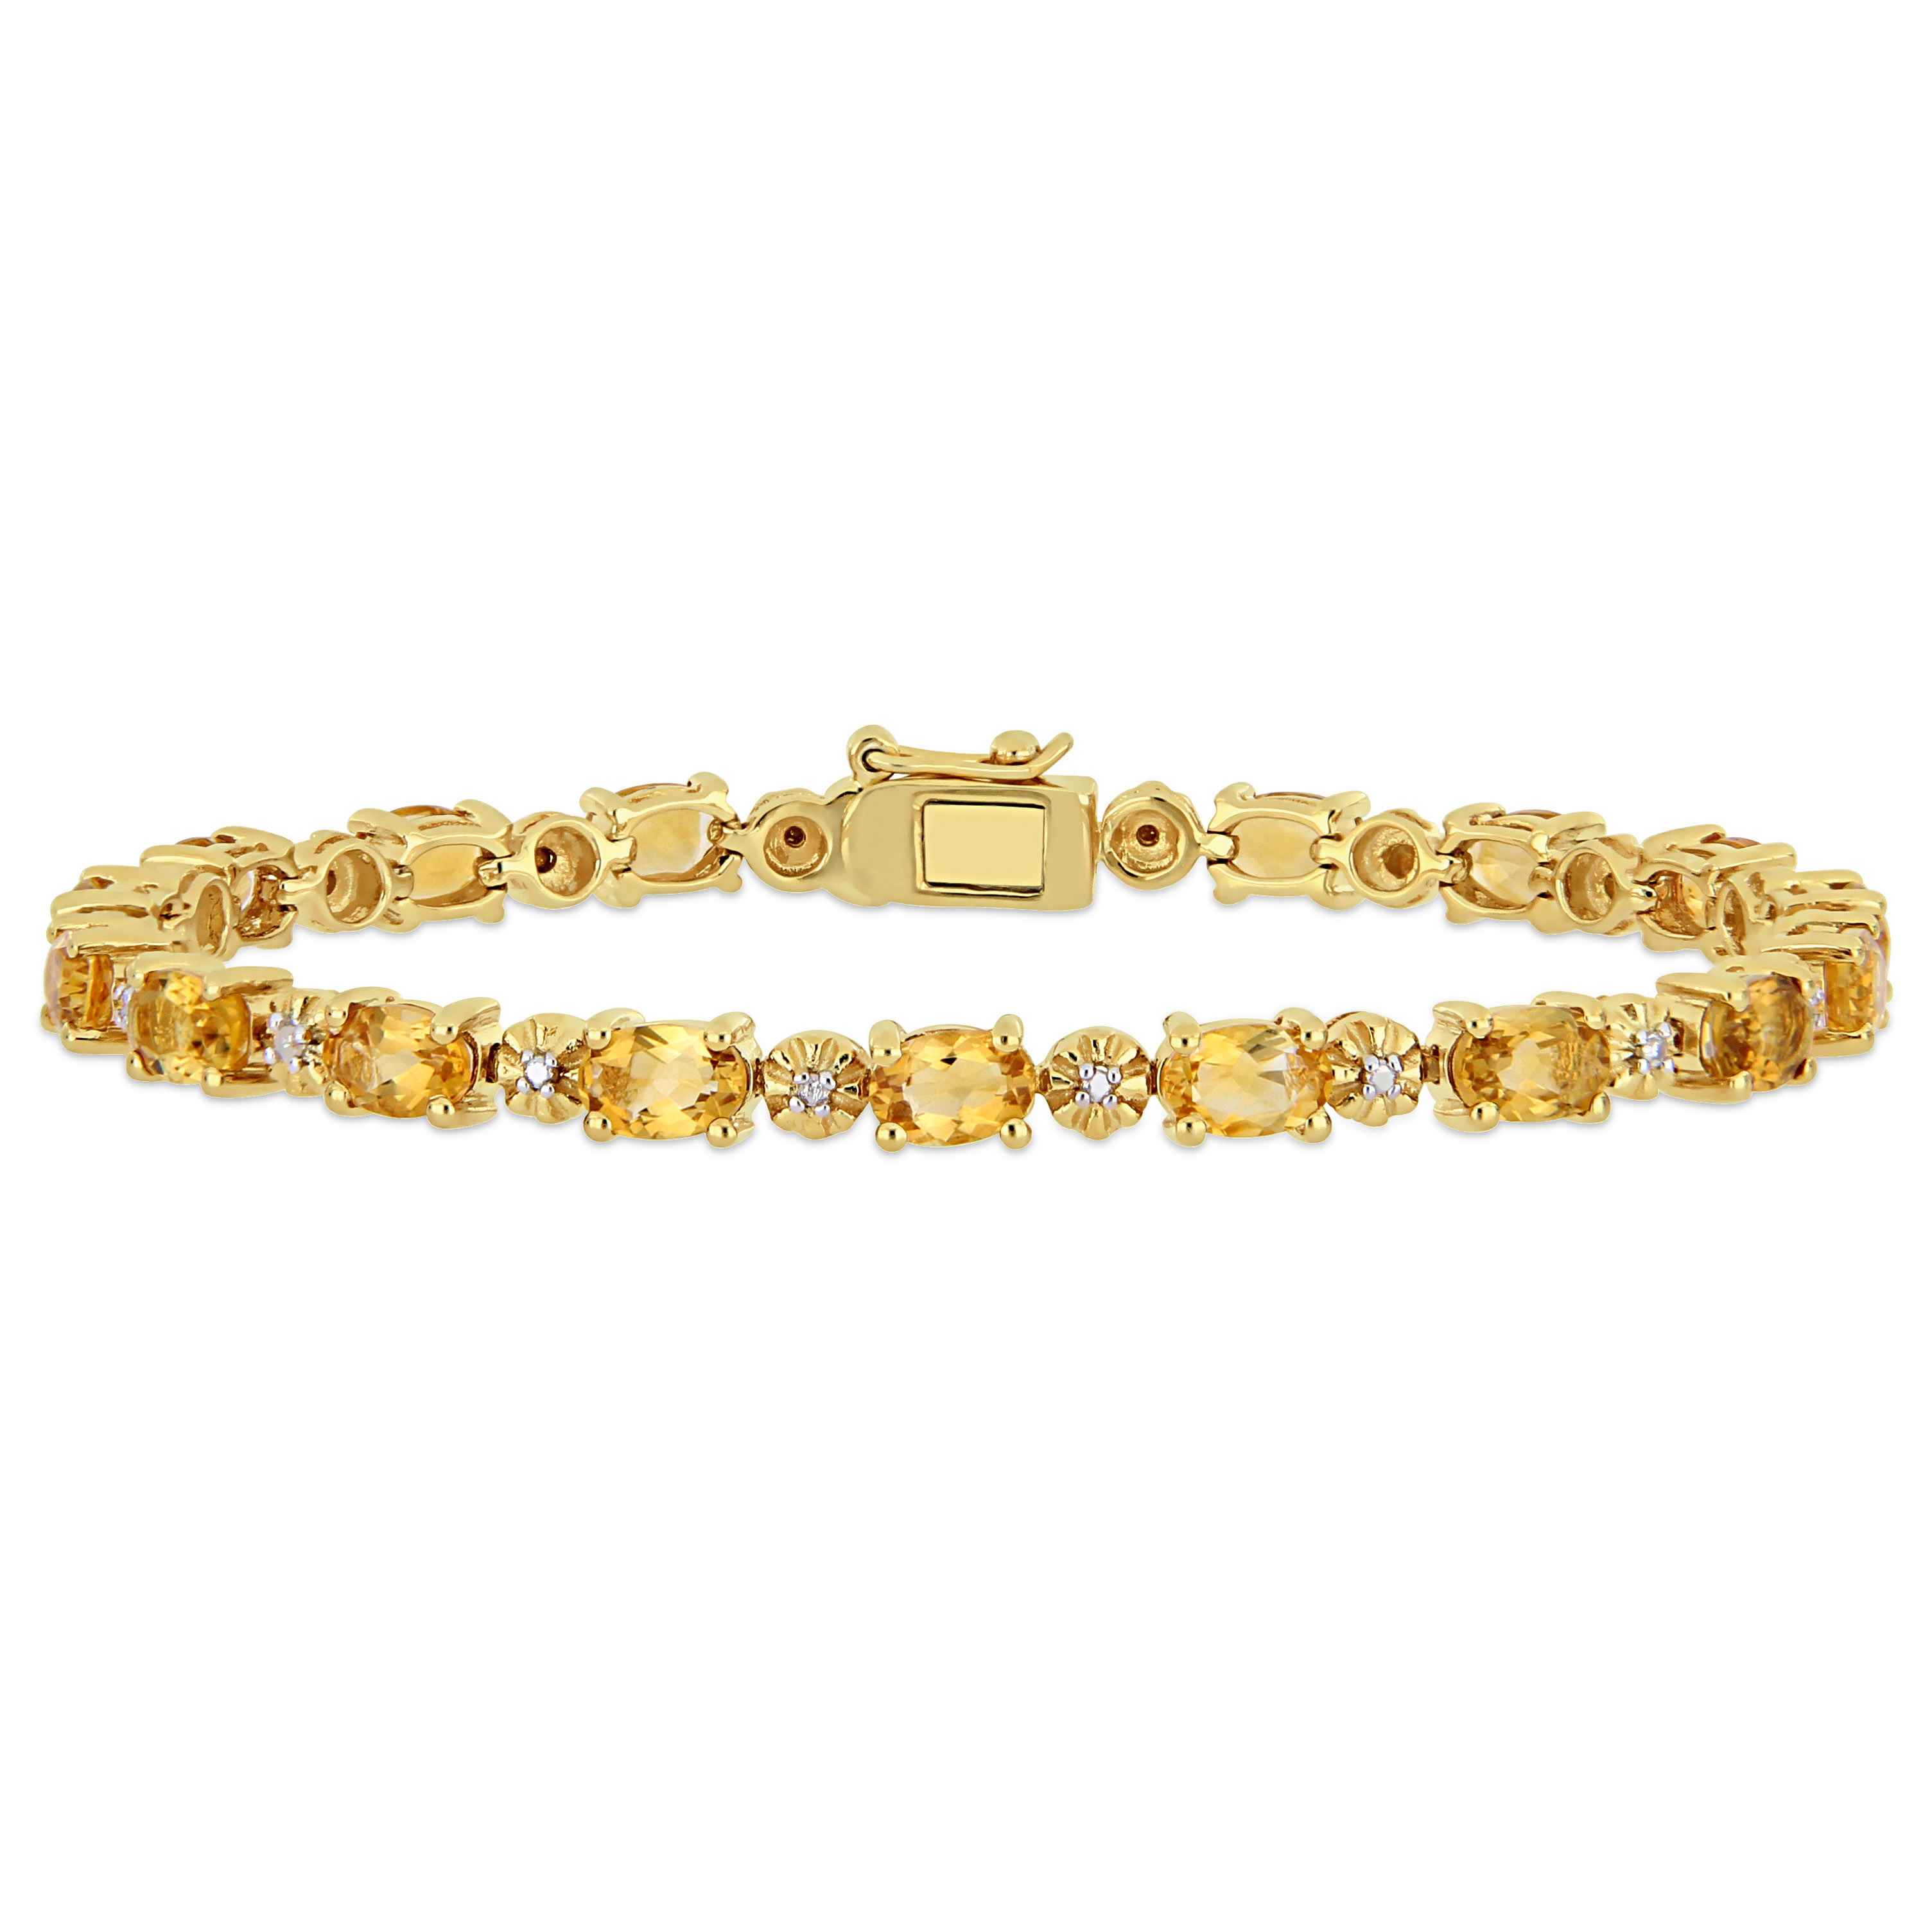 8 1/10 CT TGW Oval-Cut Citrine and Diamond Accent Tennis Bracelet in Yellow Plated Sterling Silver - 7.25 in.